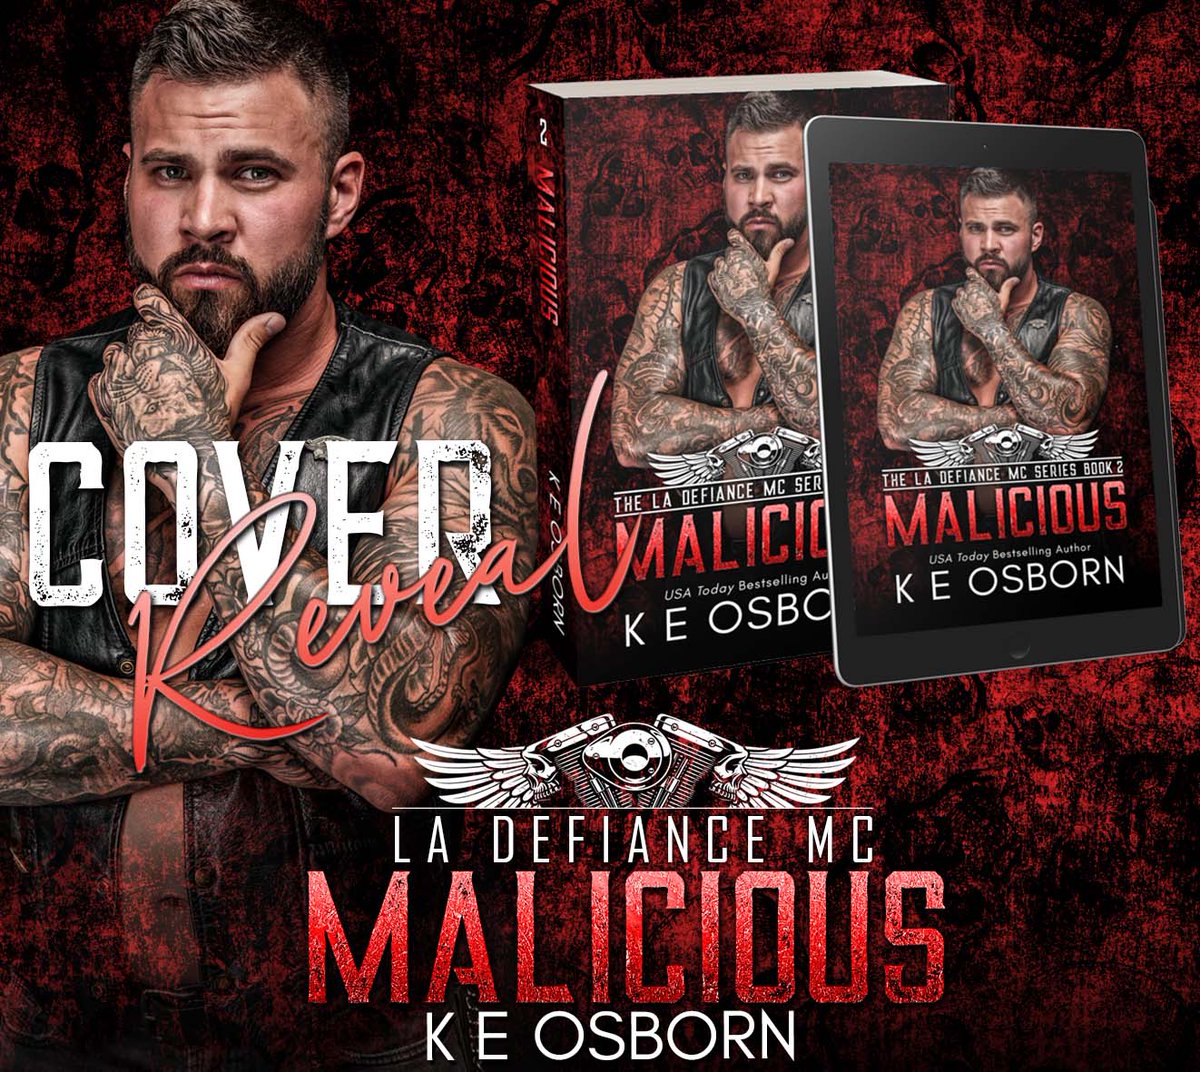 It's #CoverReveal time for the next in The LA Defiance Series by @KEOsbornAuthor 
Malicious is revving to land on your Kindles 5/13!

#Preorder: geni.us/mladevents

#MCRomance #AlphaholeHero #EnemiestoLovers #ForcedProximity #Forbidden #TouchHerandDie @Chaotic_Creativ